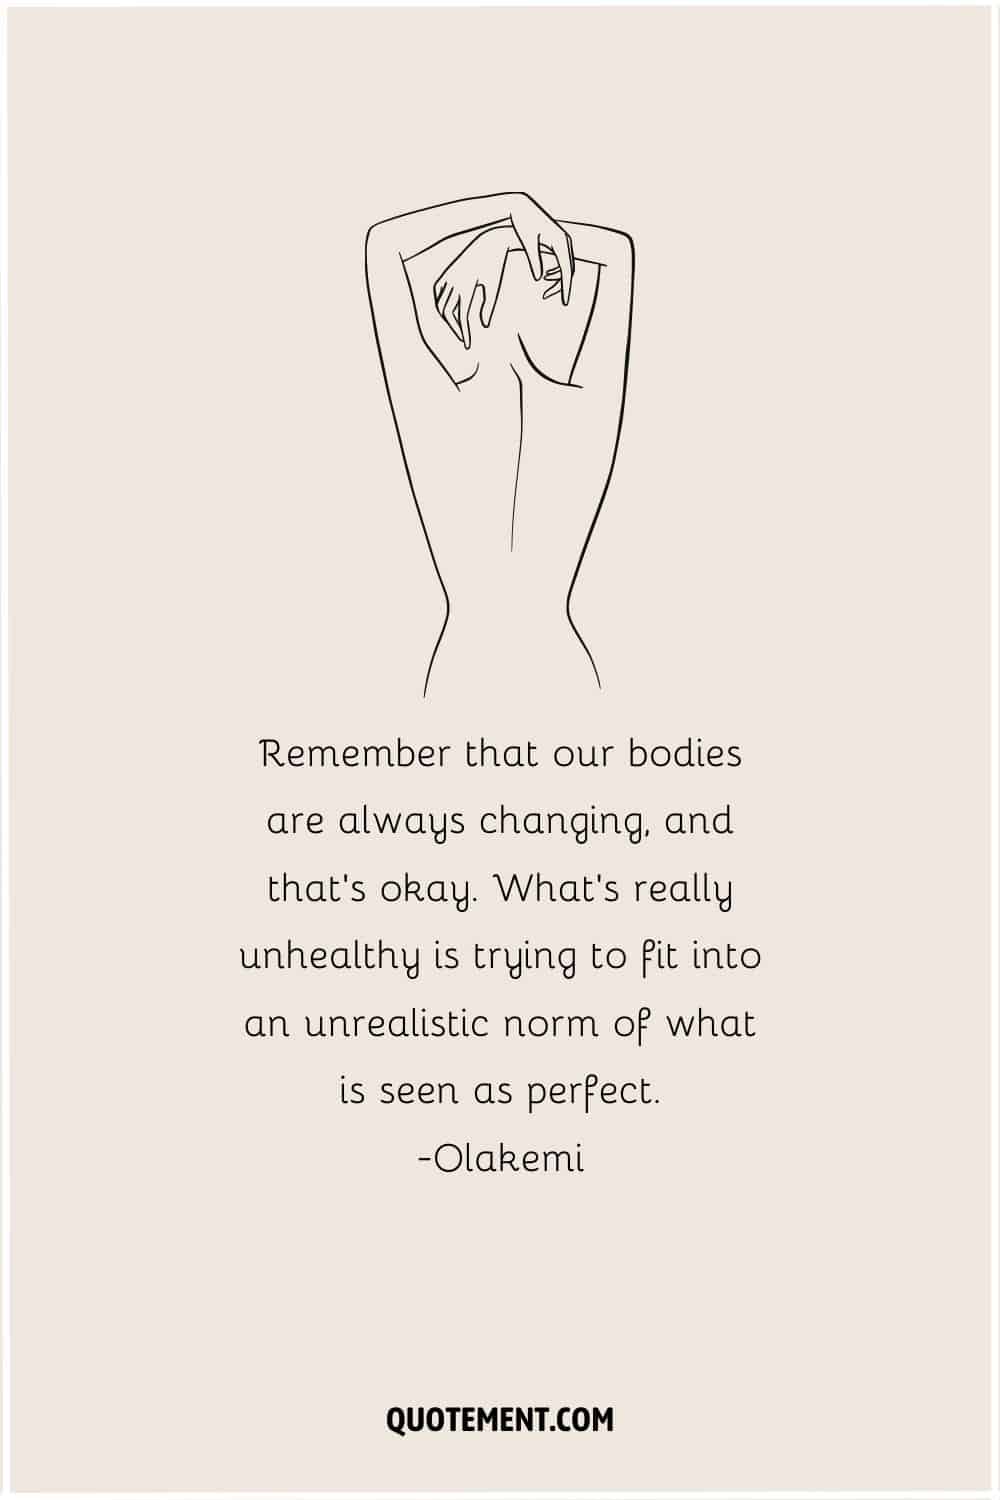 Remember that our bodies are always changing, and that’s okay